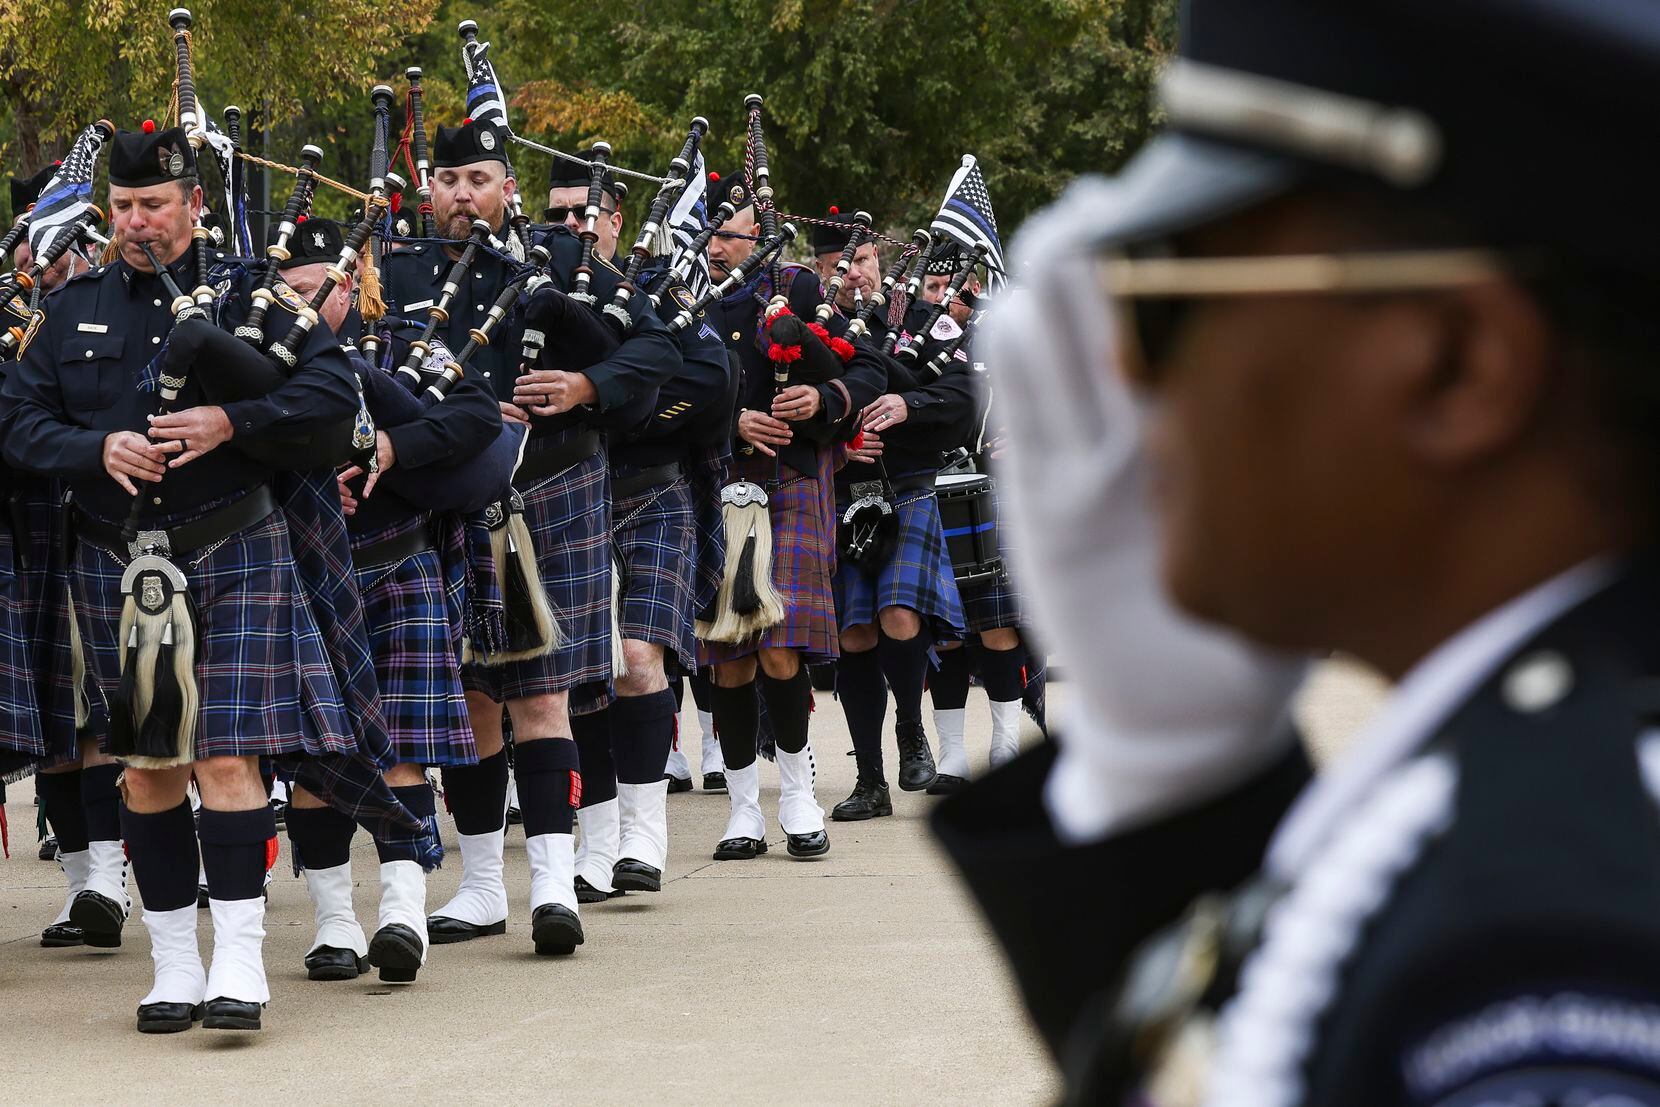 Amazing grace is played on the bagpipes ahead of the hearse holding Grand Prairie police...